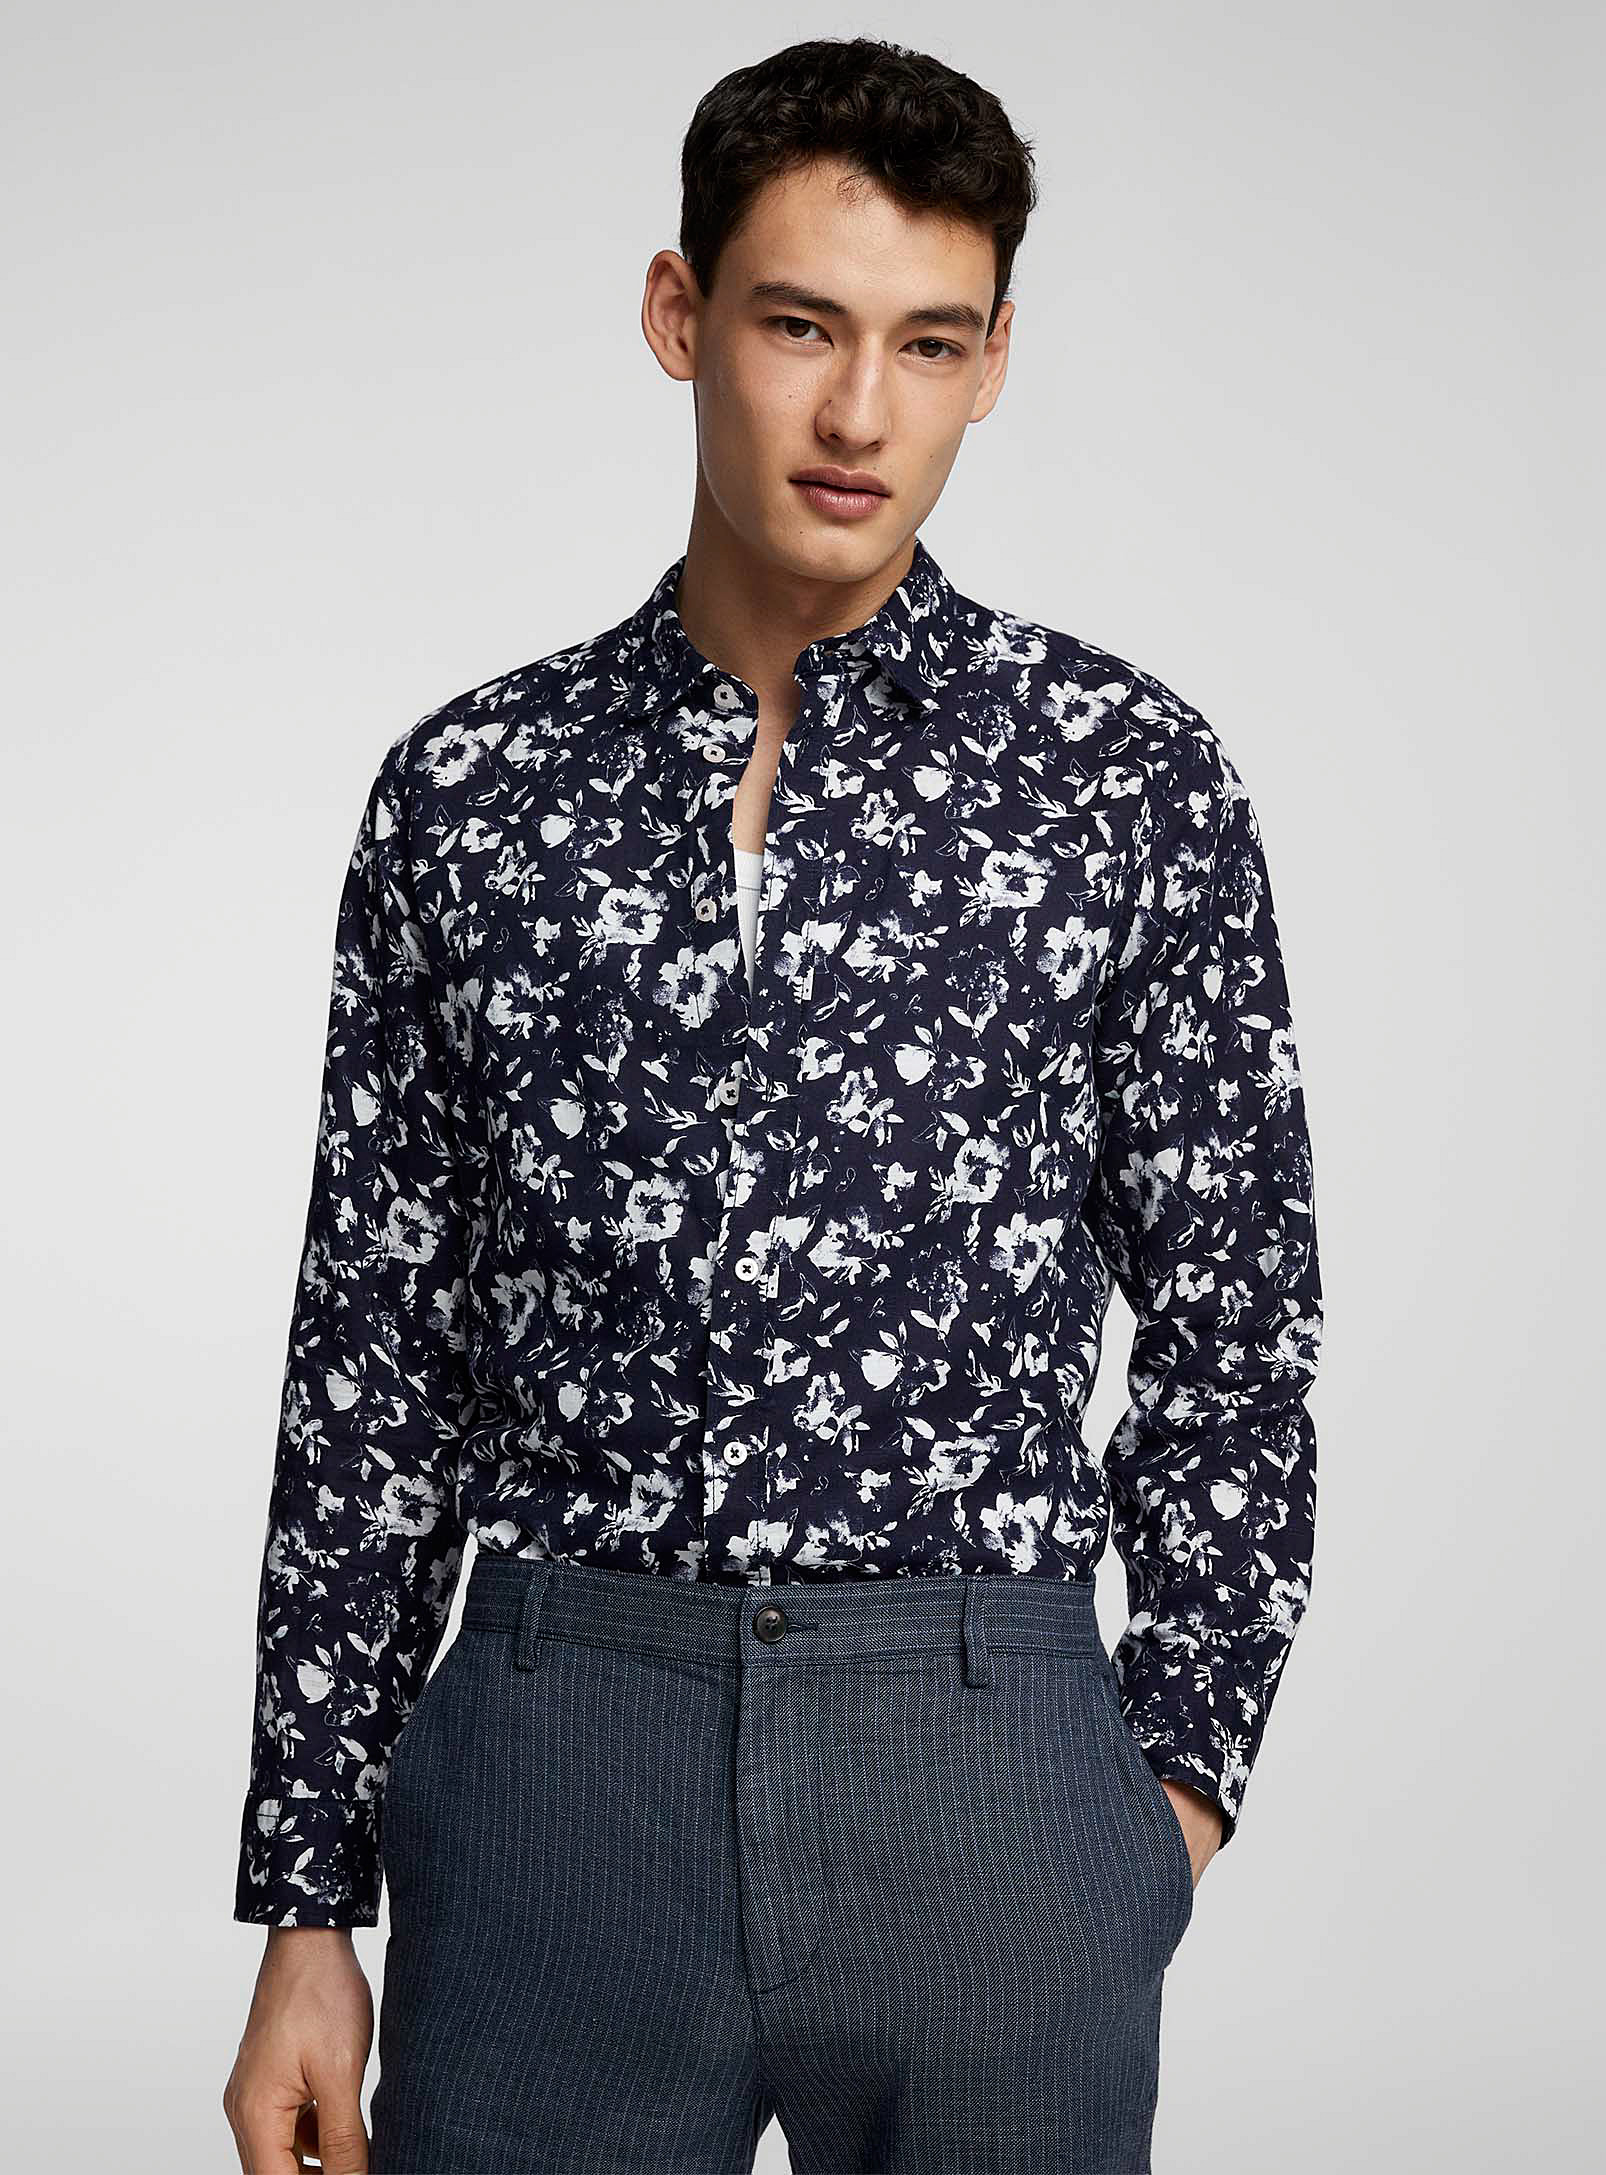 United Colors of Benetton - Men's Abstract flower navy shirt